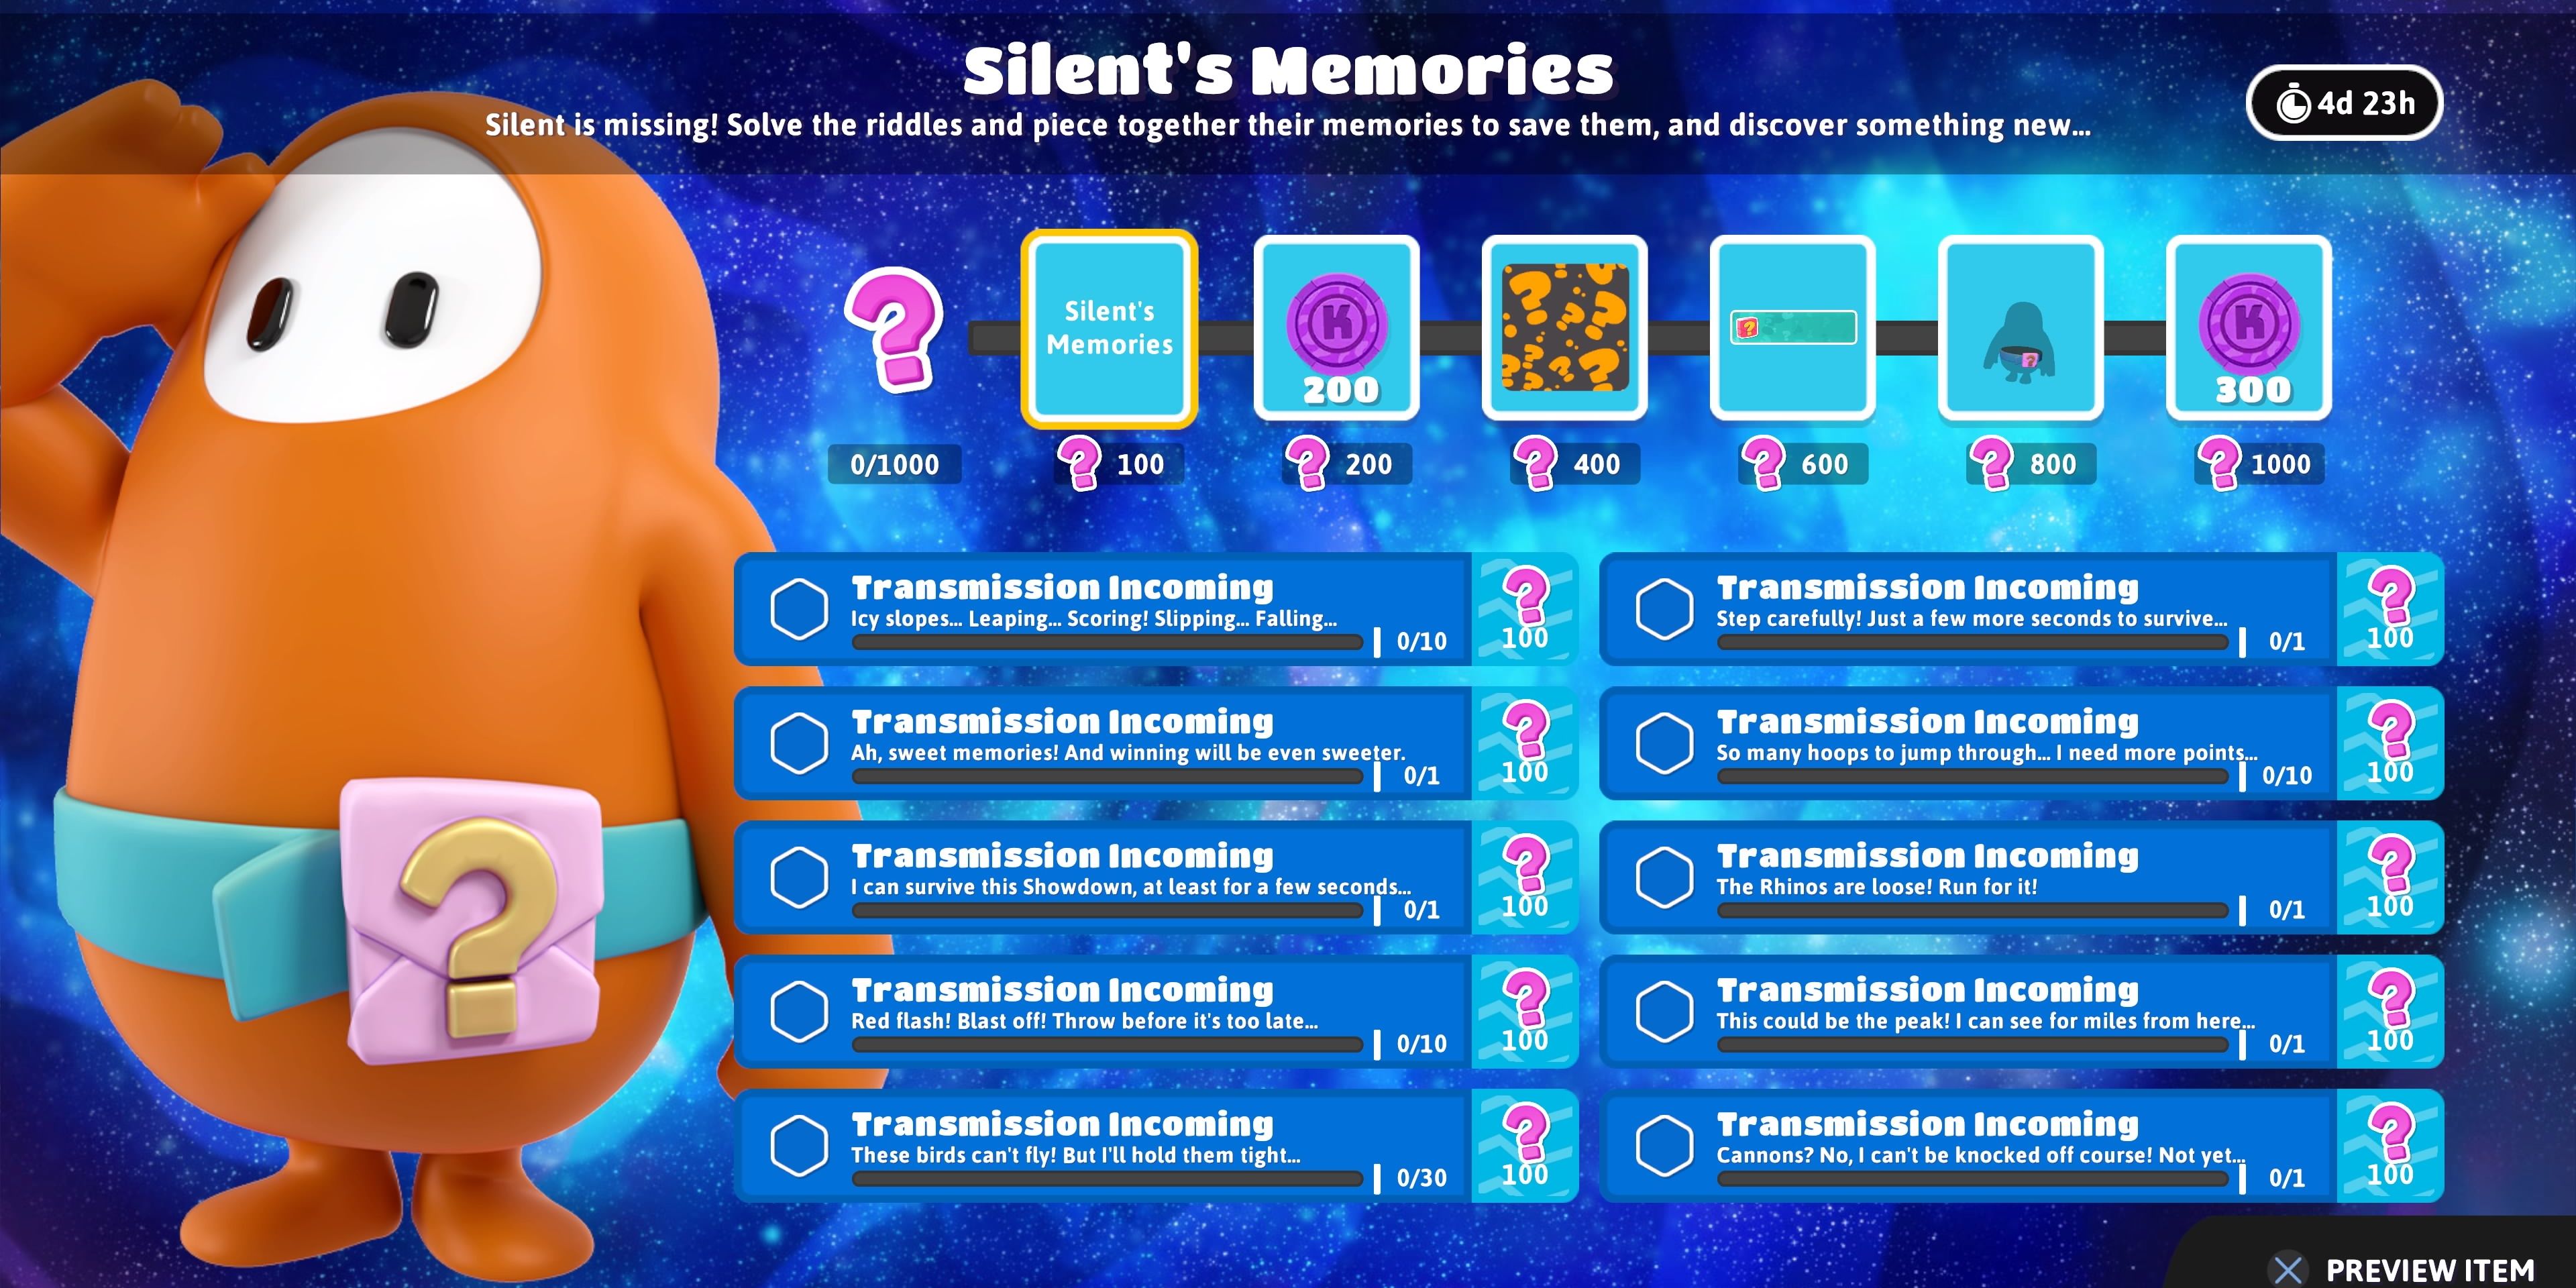 Silent's Memories Event page from Fall Guys, showing all event missions and rewards